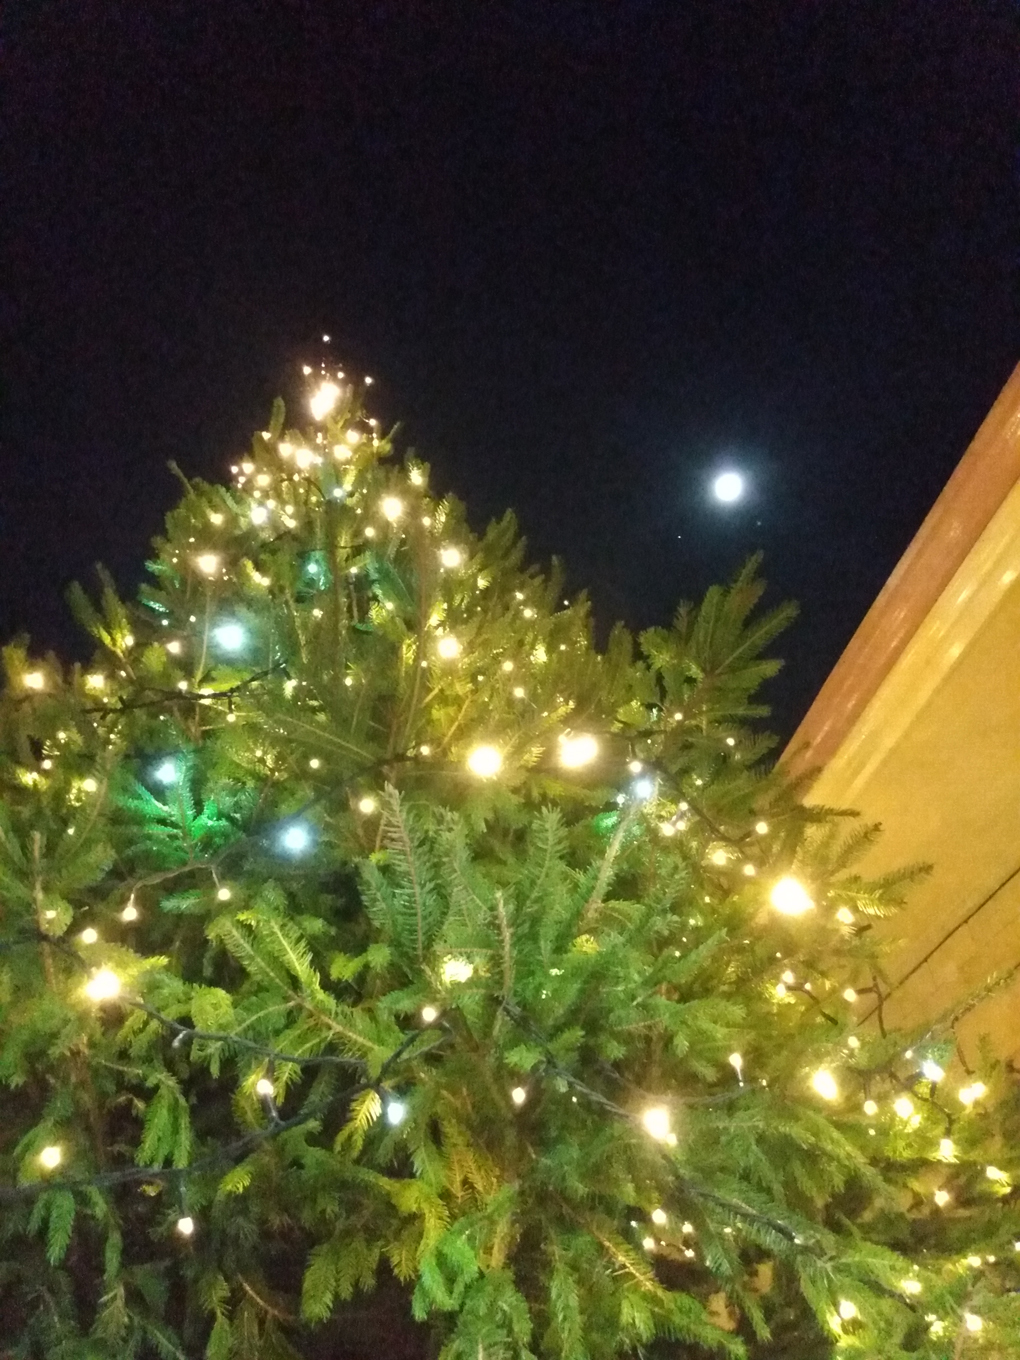 A tall Christmas tree being looked up at from below with the moon shining in the sky